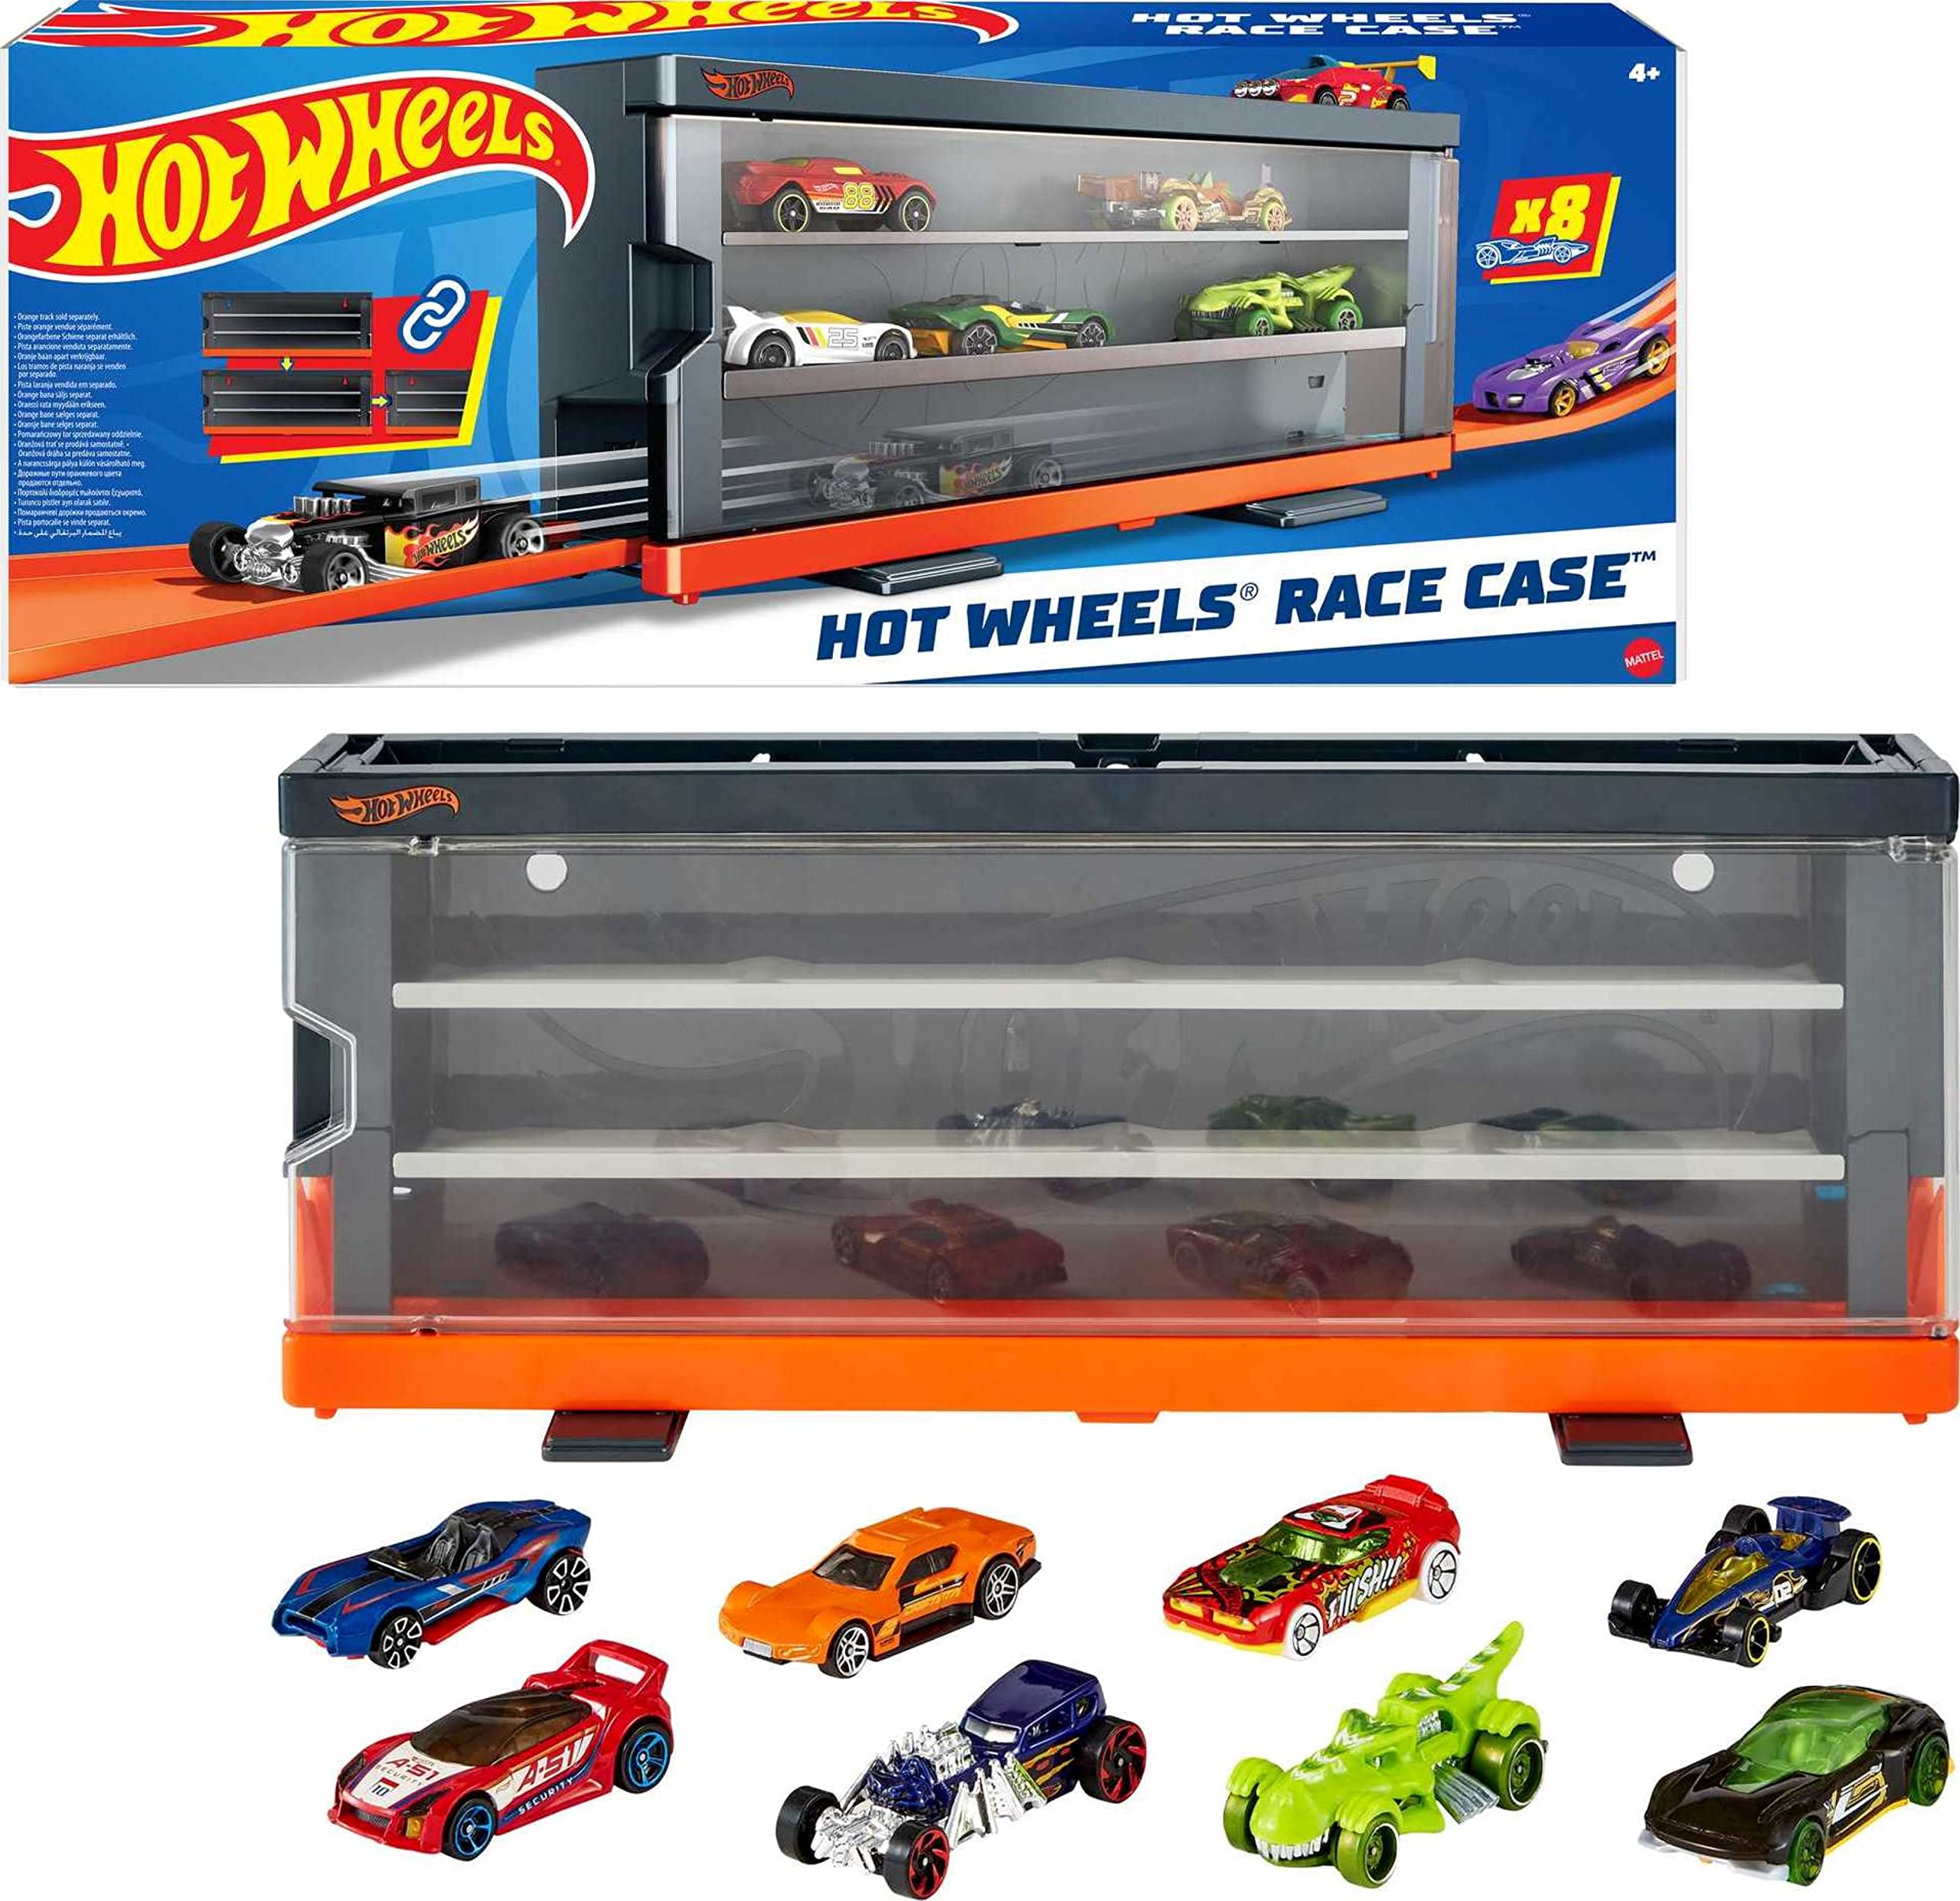 Hot Wheels Race Case Interactive Display Case w/ 8 Cars $13.68 + Free Shipping w/ Prime or on $35+